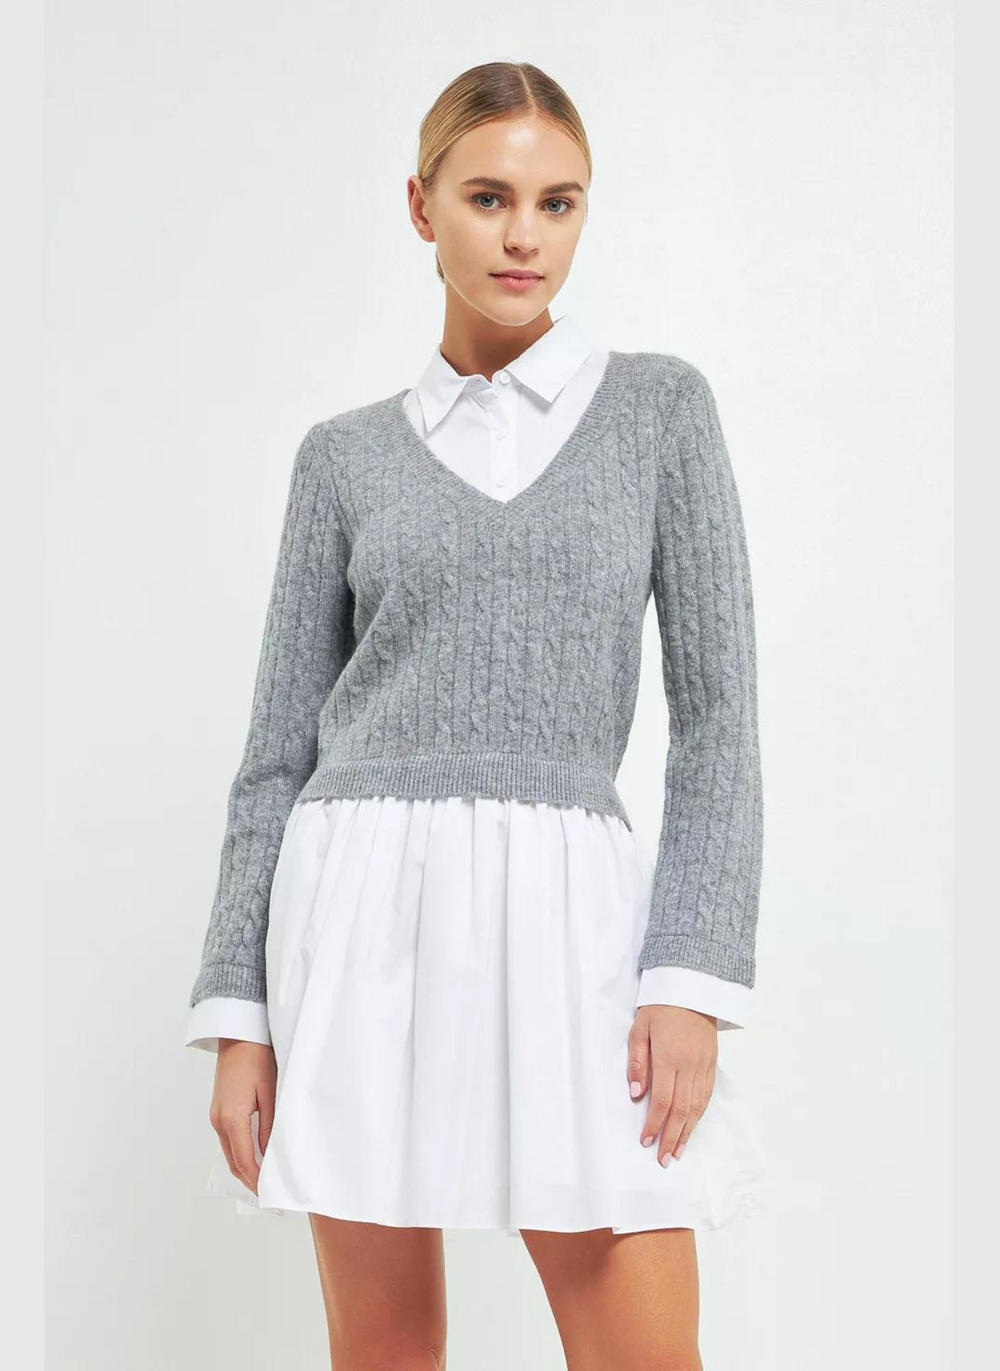 Cable Knit Layered Mixed Media Dress – Just the Thing